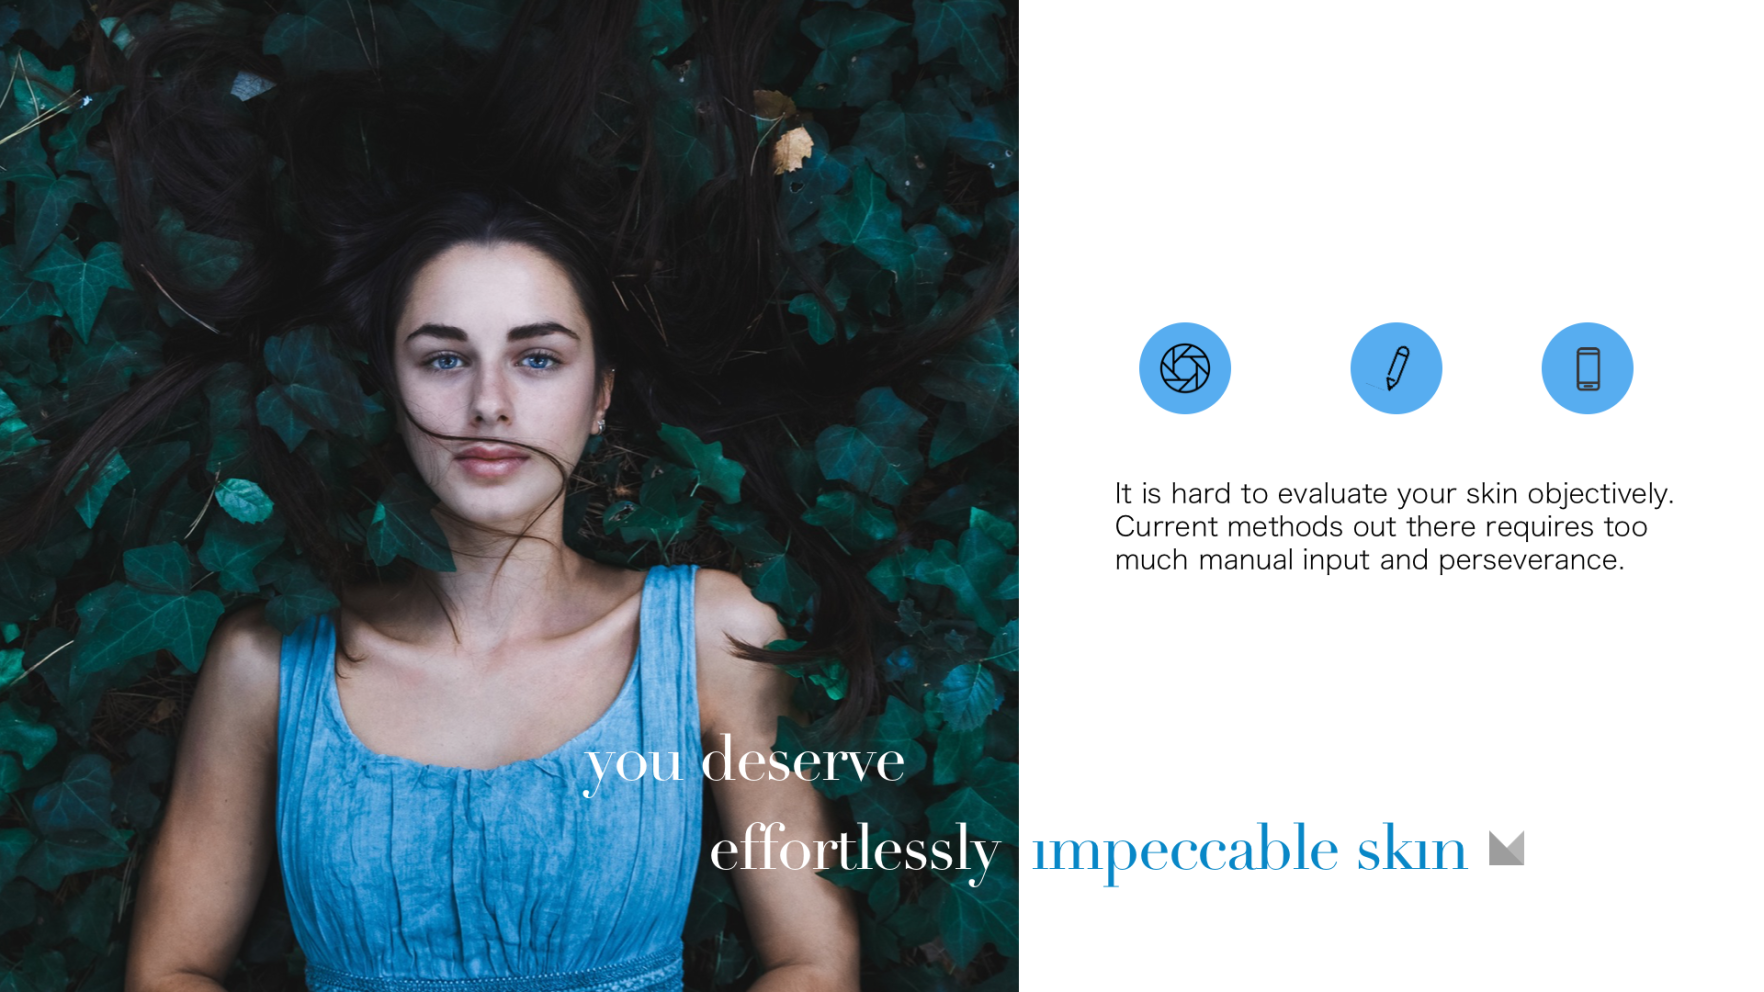 Mira:  You deserve effortlessly impeccable skin.  It is hard to evaluate your skin objectively.  Current methods require too much manual input and perseverance